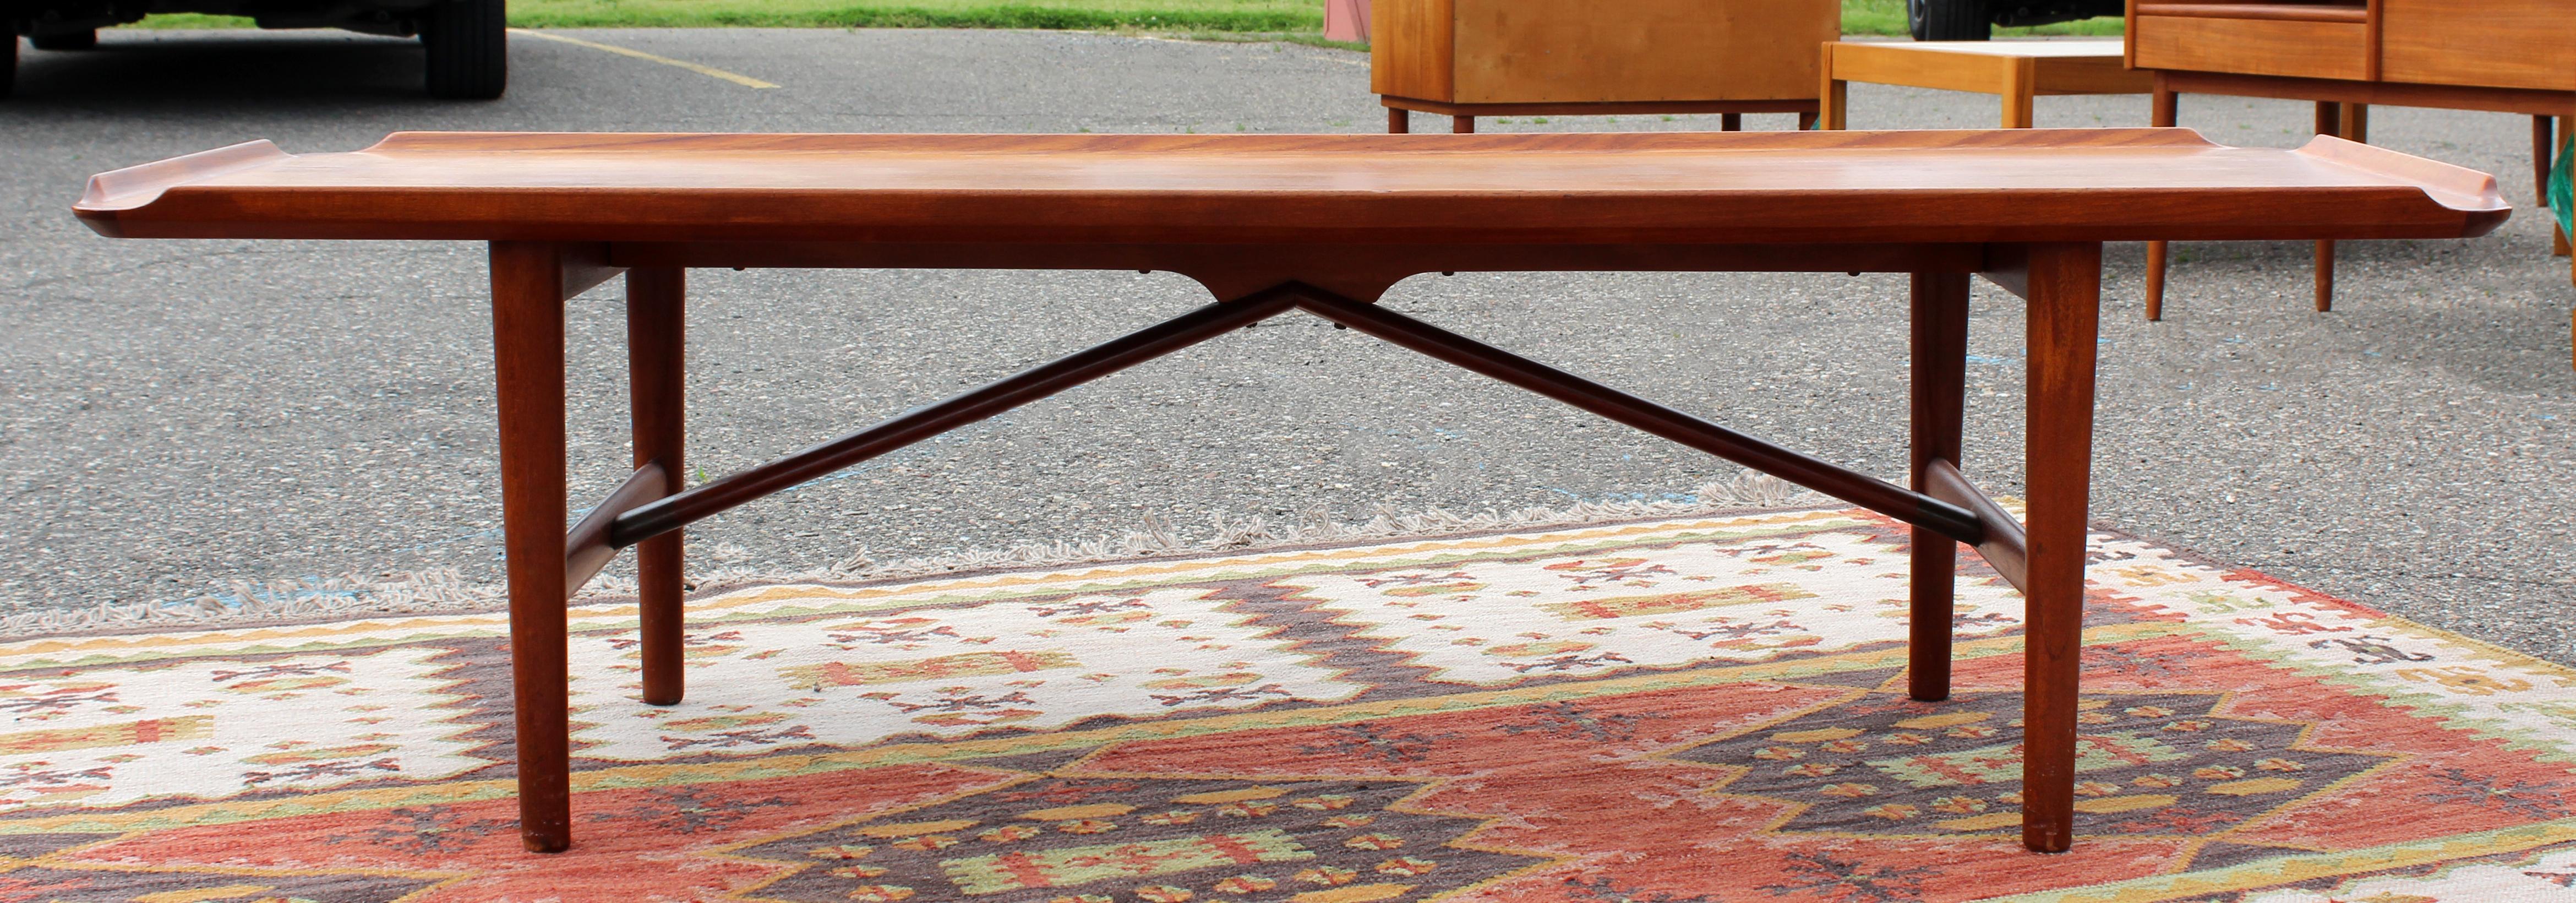 For your consideration is a gorgeous, long, rectangular teak wood coffee table with lip, made in Denmark, circa the 1960s. Attributed to Finn Juhl. In excellent vintage condition. The dimensions are 62.5